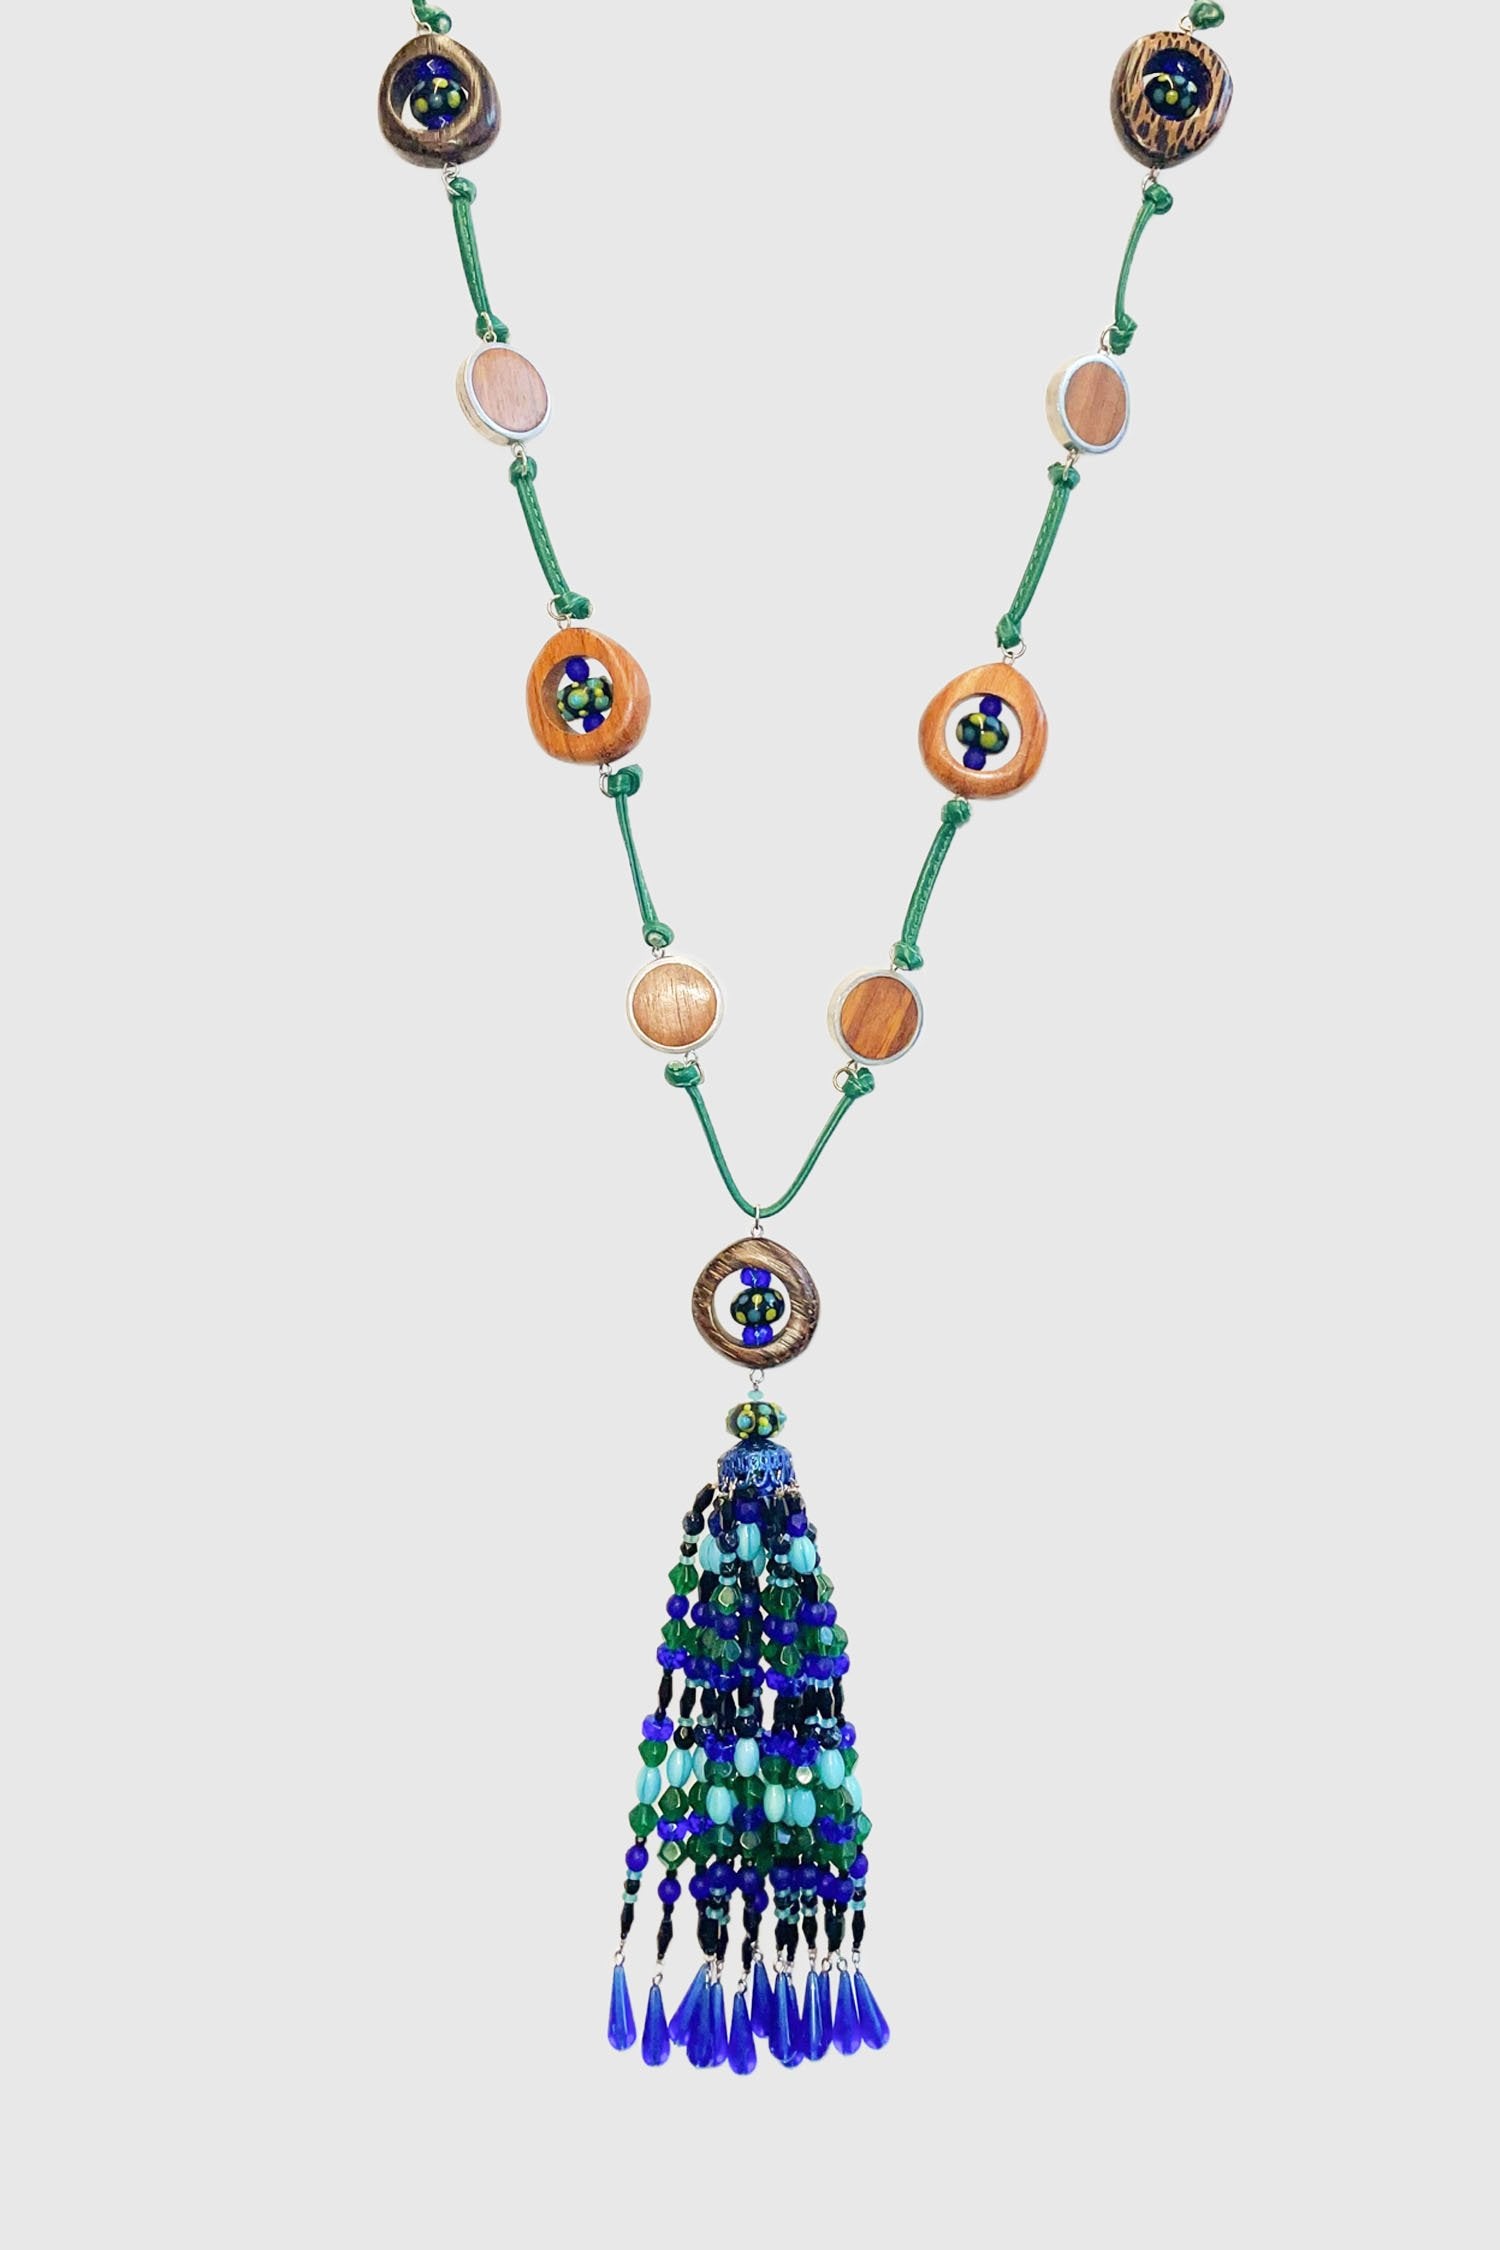 15 Tassel Necklace, colored beads, pendant 8.5-inch, Blue-tone, Clasp, Material: green/beige Wood